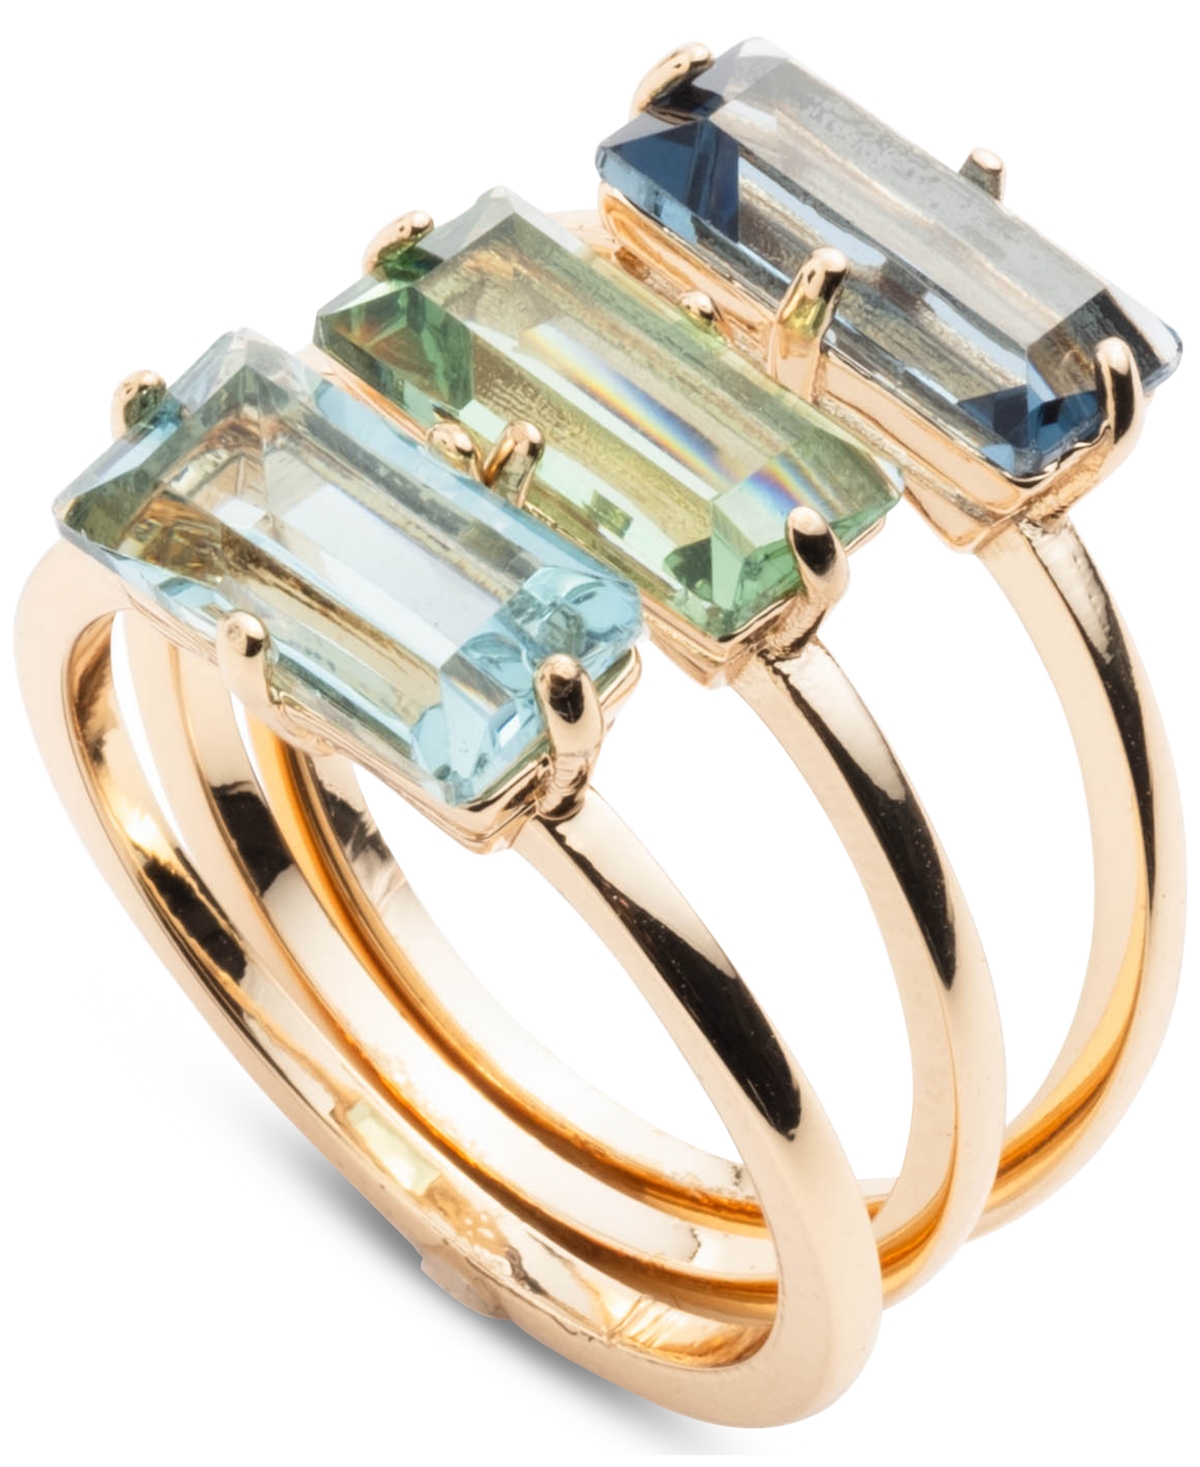 Gold-Tone 3-Pc.Set Baguette Stone Stack Rings - Blue